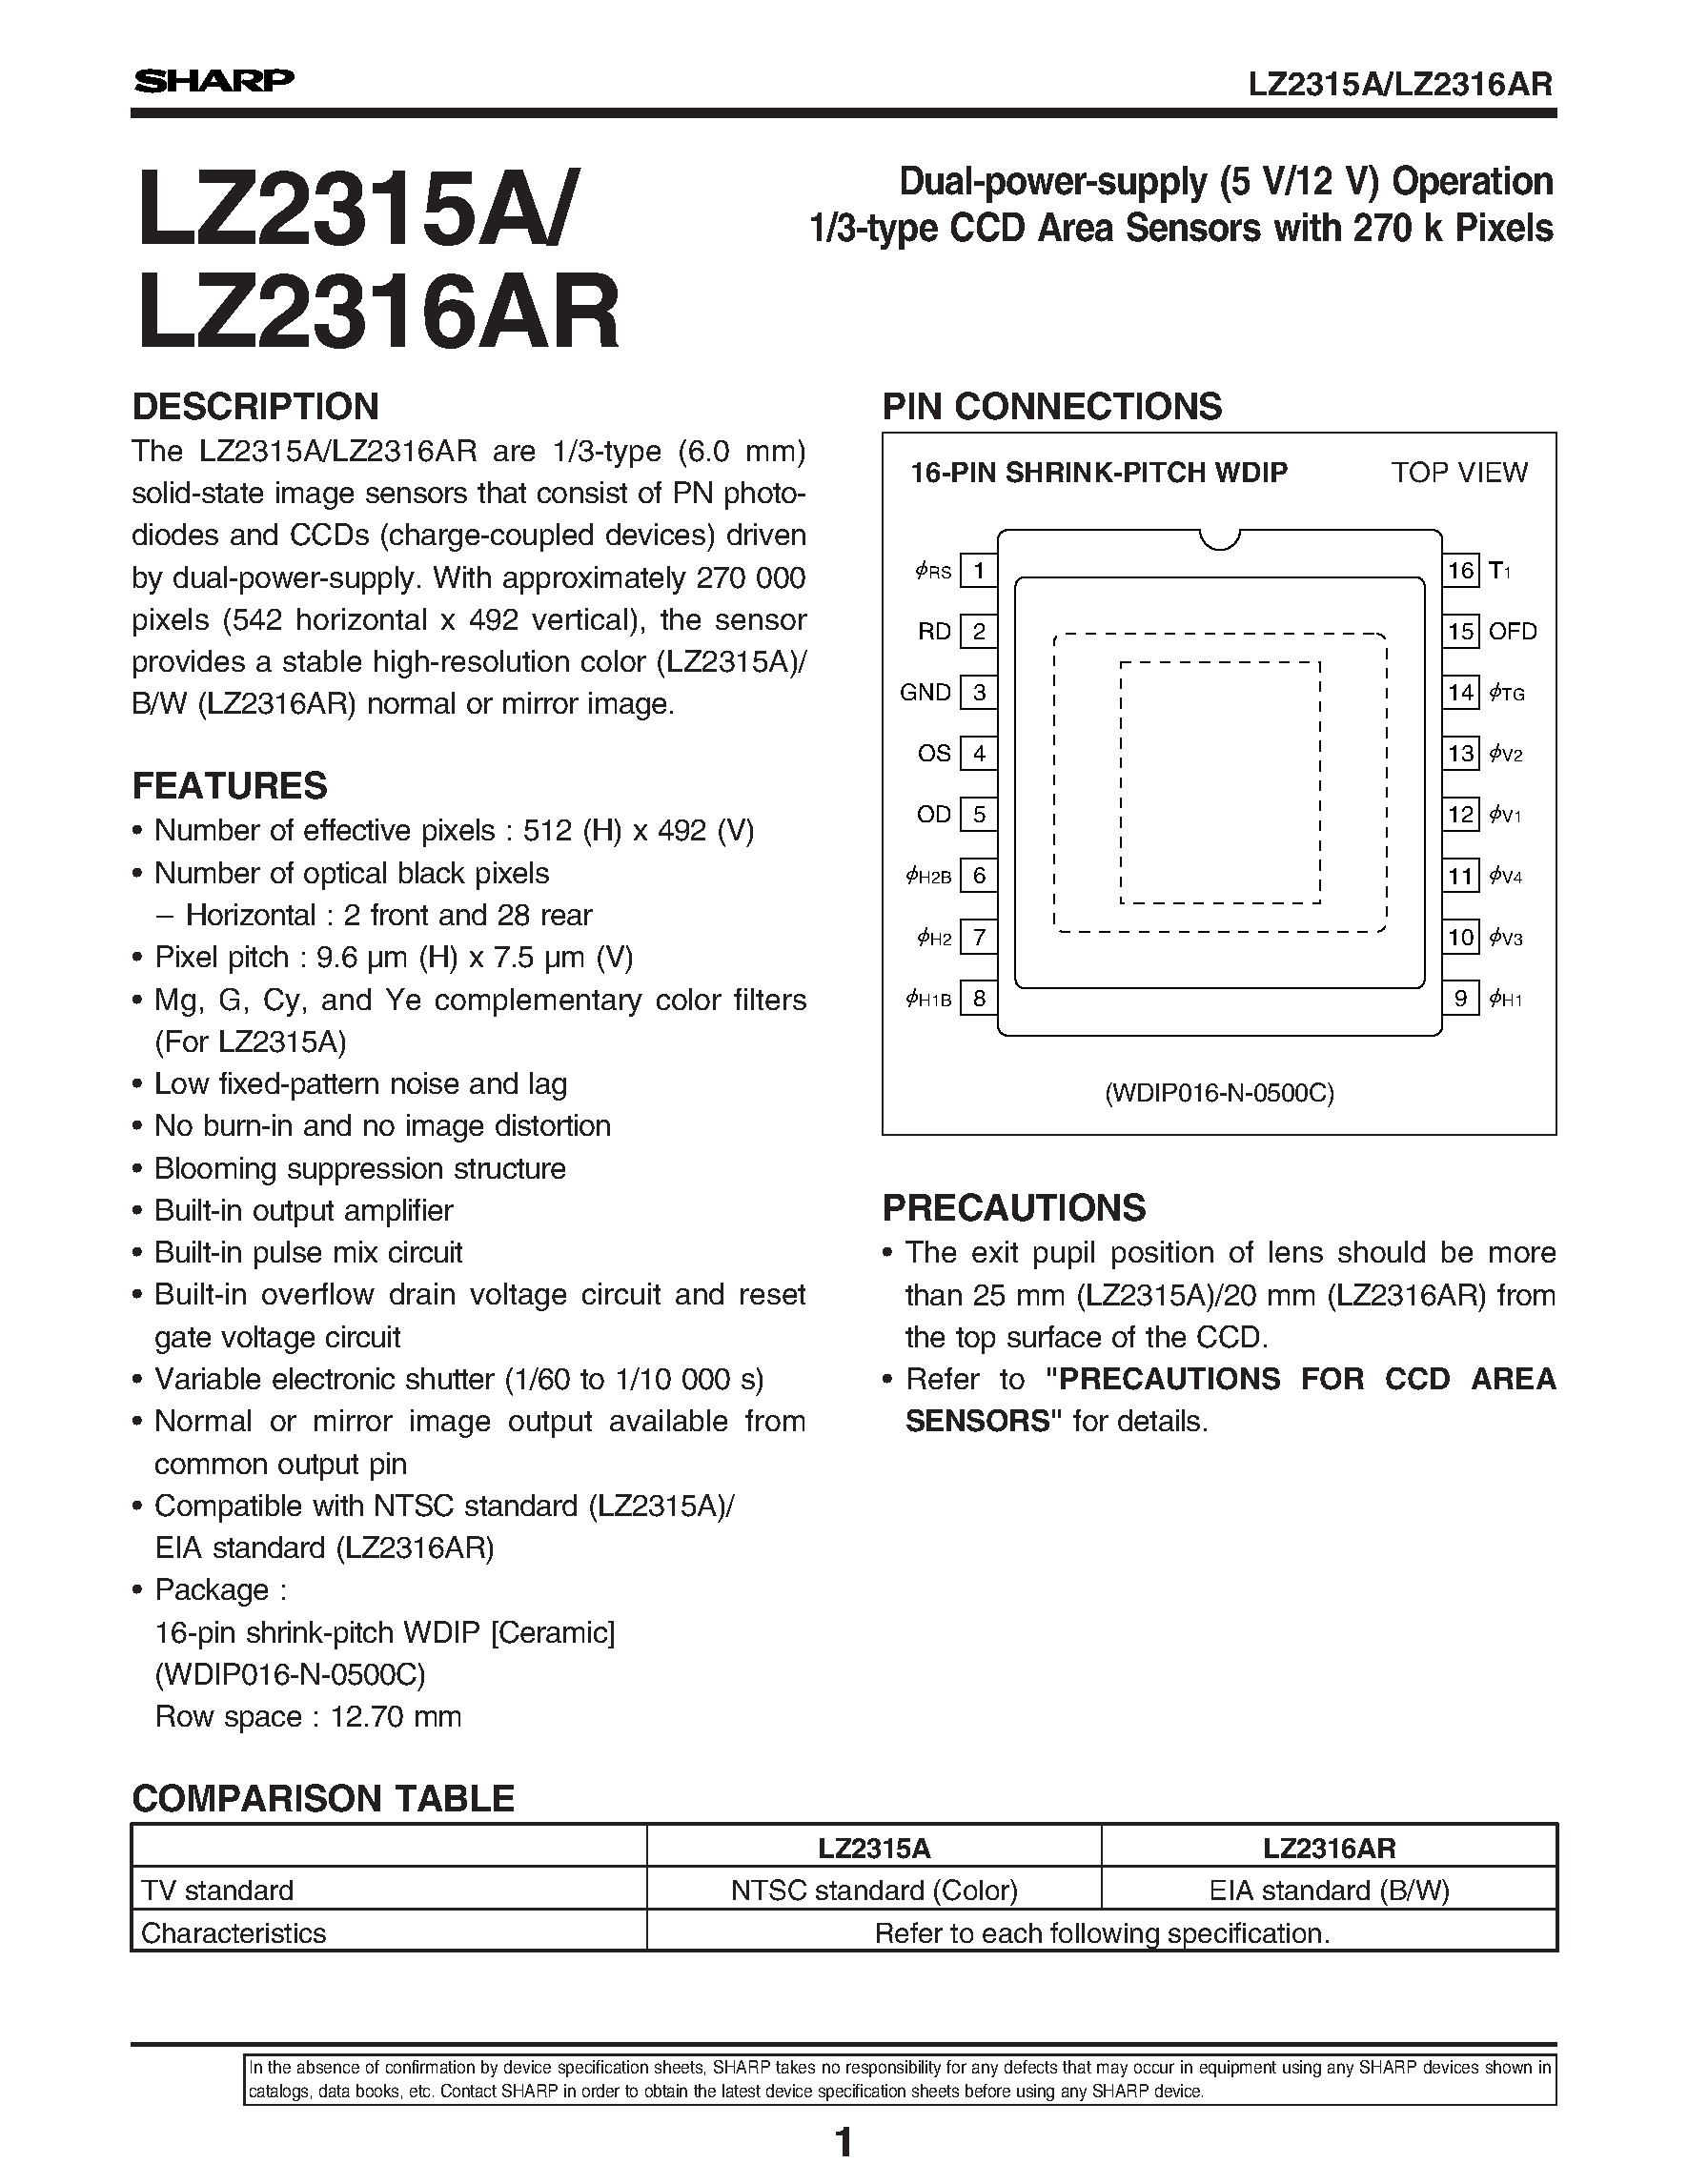 Datasheet LZ2316AR - Dual-power-supply (5 V/12 V) Operation 1/3-type CCD Area Sensors with 270 k Pixels page 1